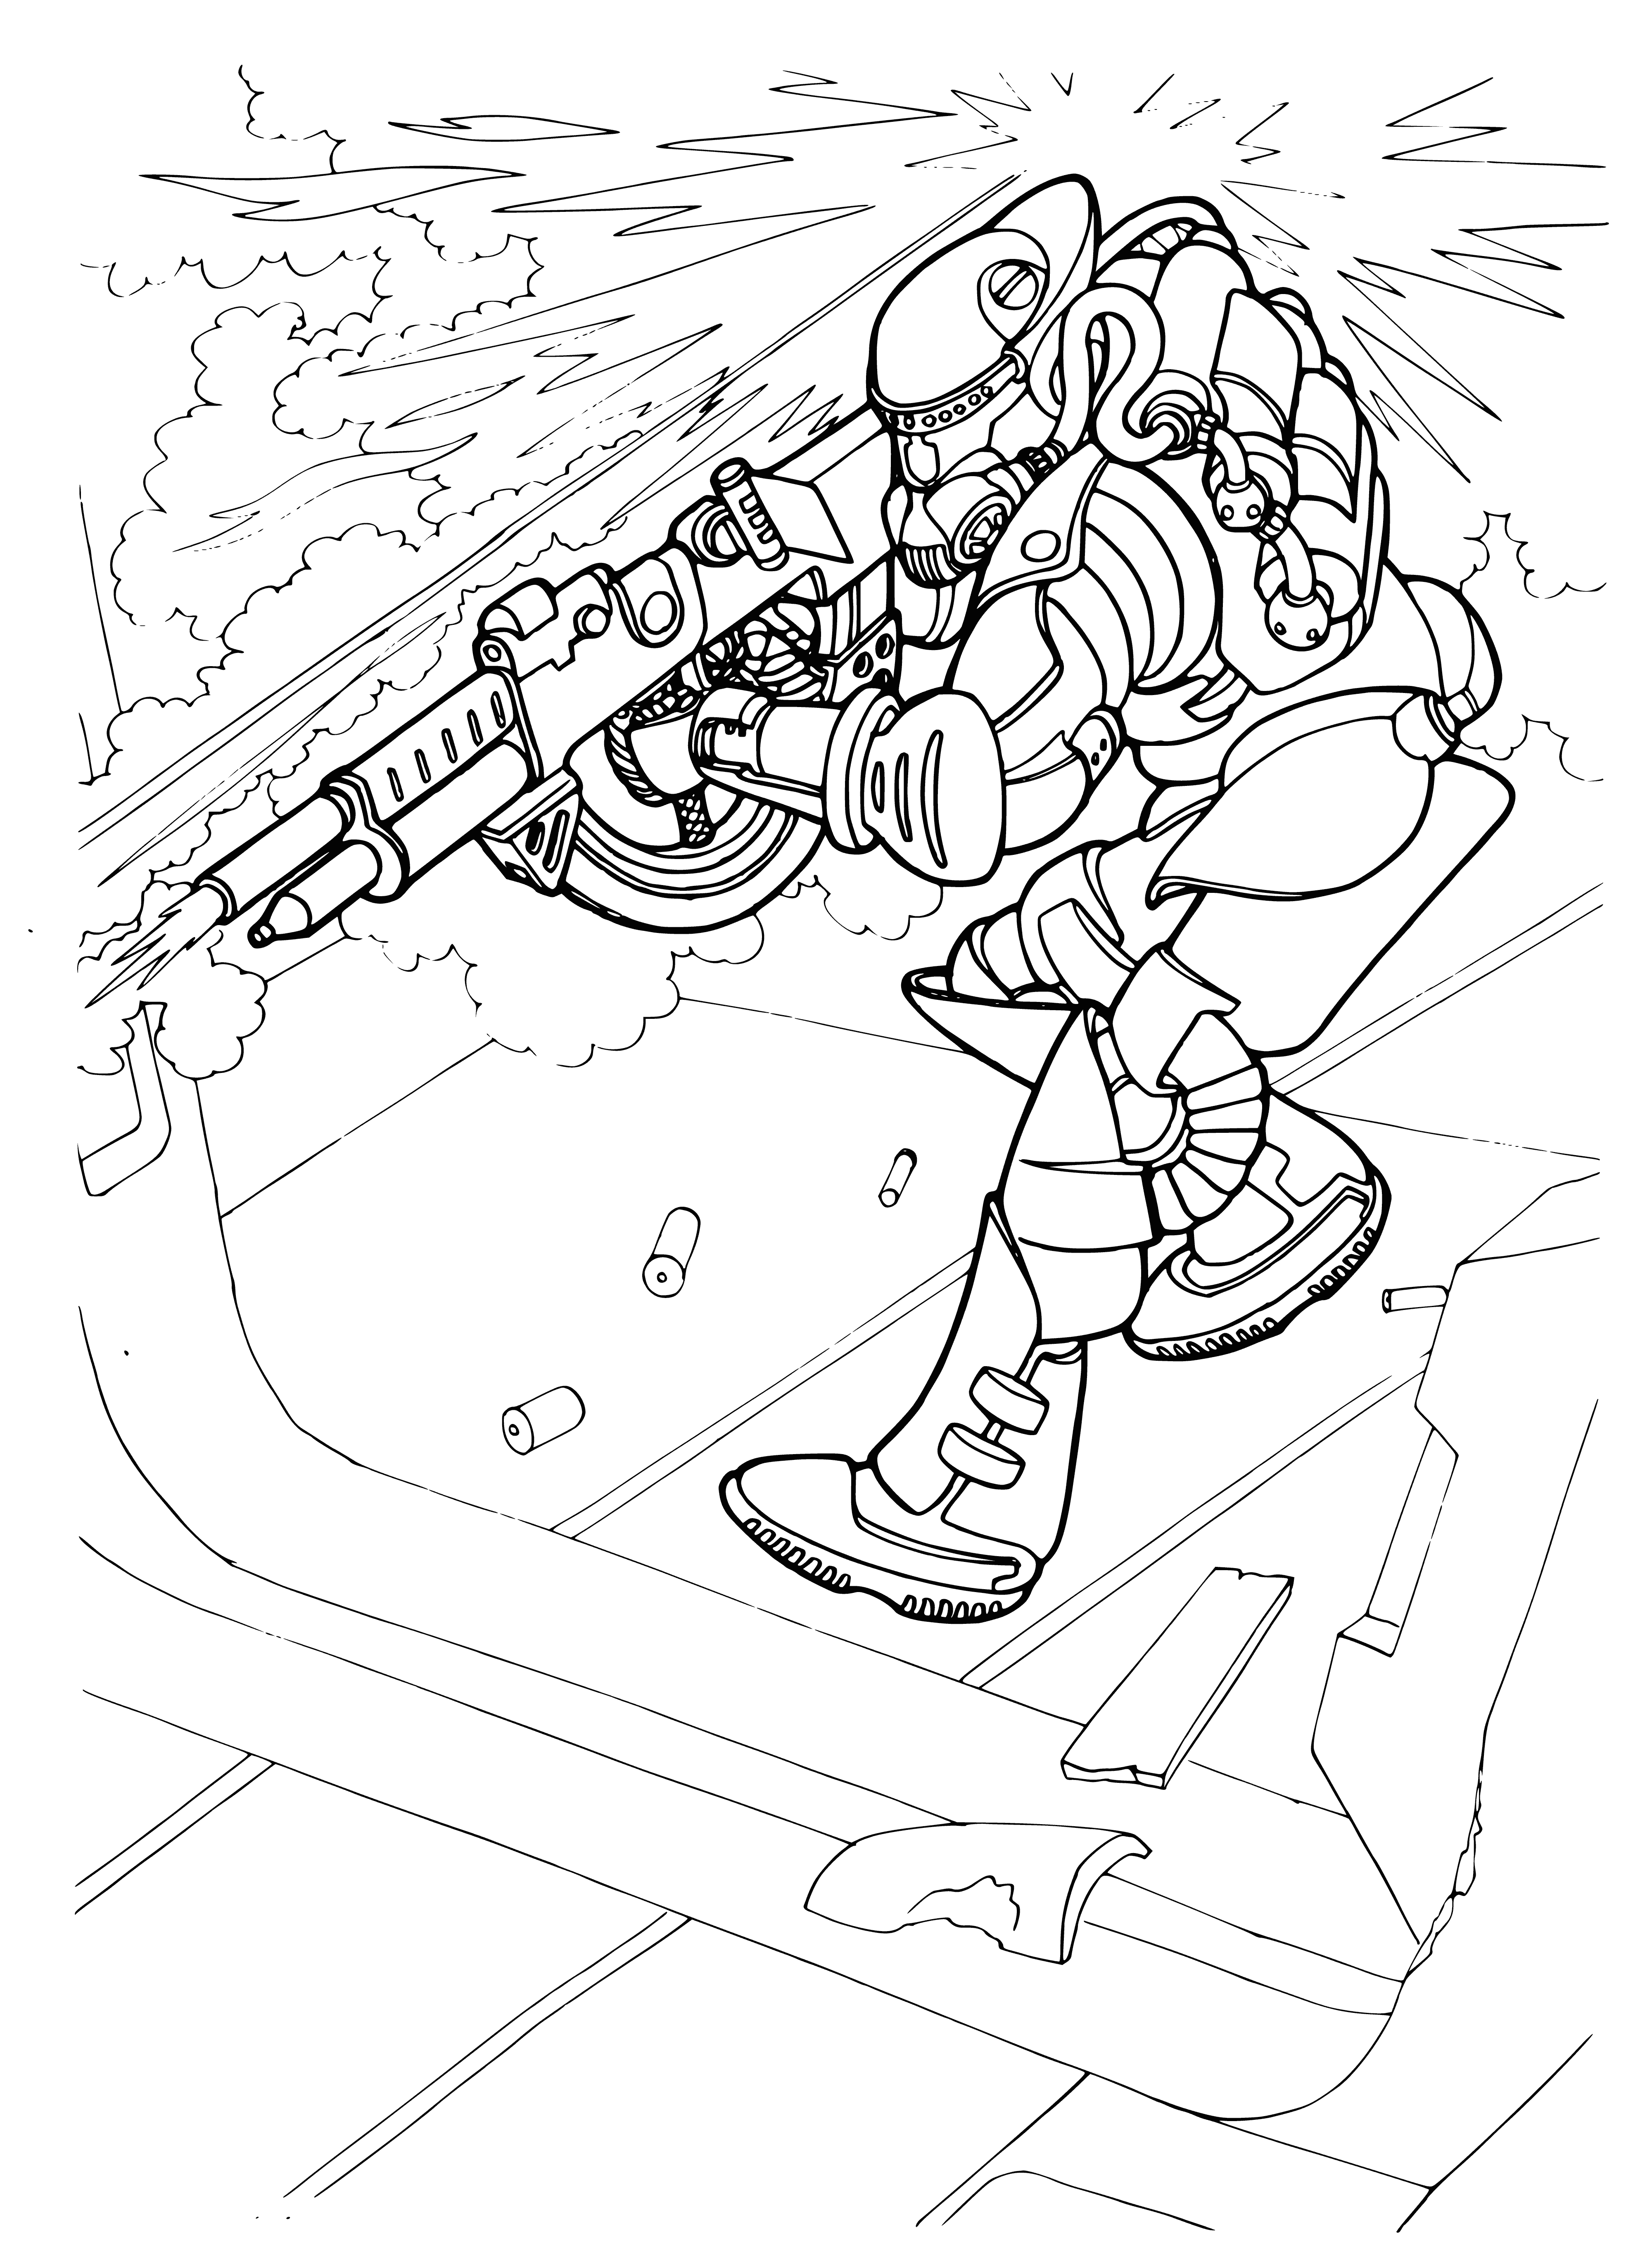 A fighter with a machine gun coloring page